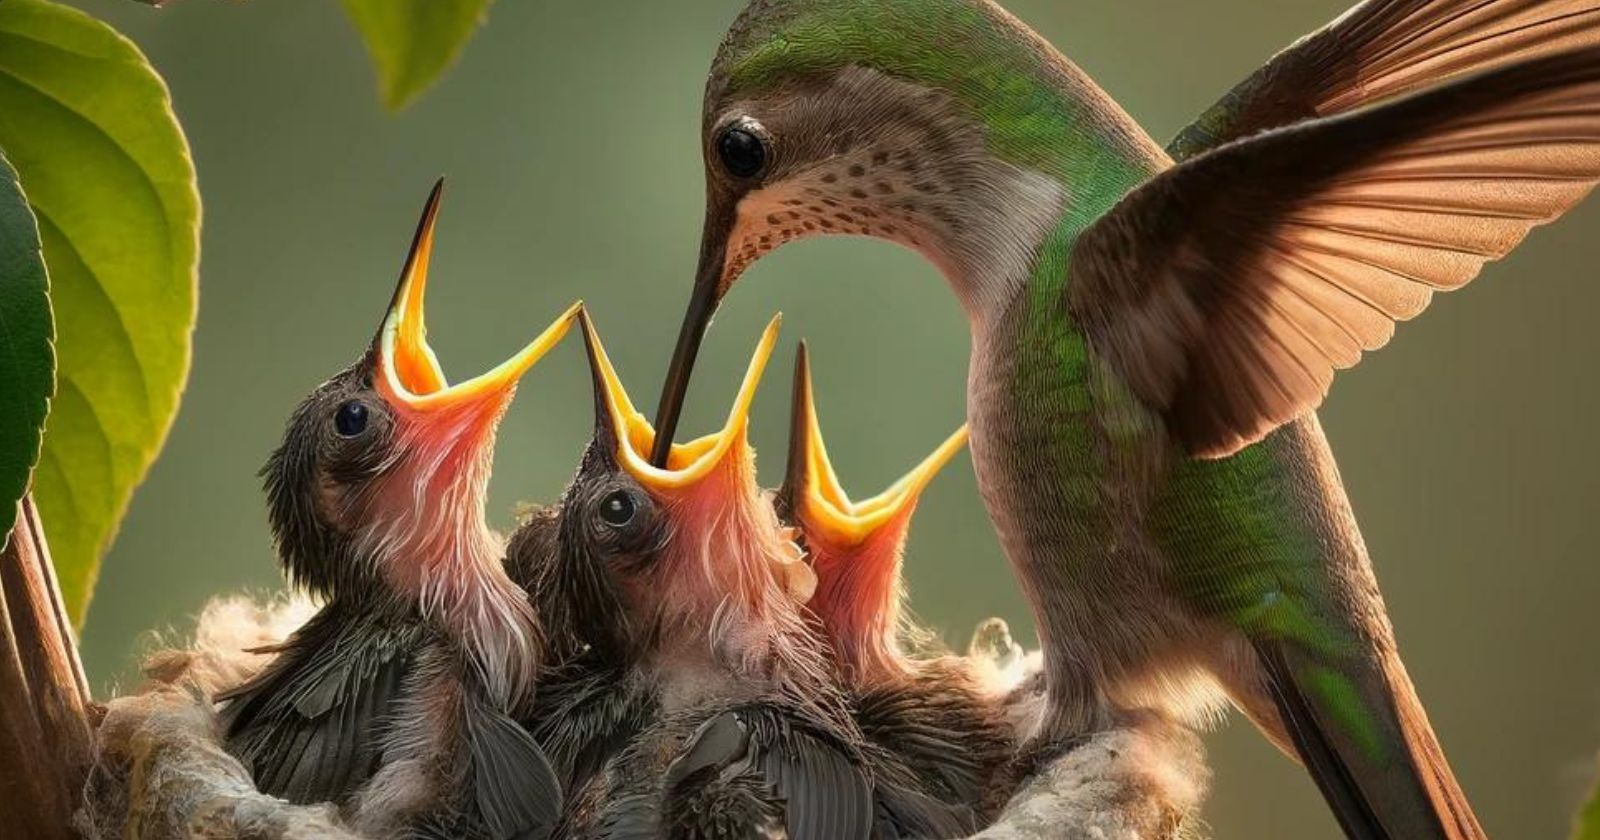 An adult hummingbird feeding its chicks in a nest by regurgitating food into their open mouths. The chicks are eagerly receiving nourishment, illustrating the feeding behavior and diet of baby hummingbirds. The scene is set against a backdrop of green foliage.